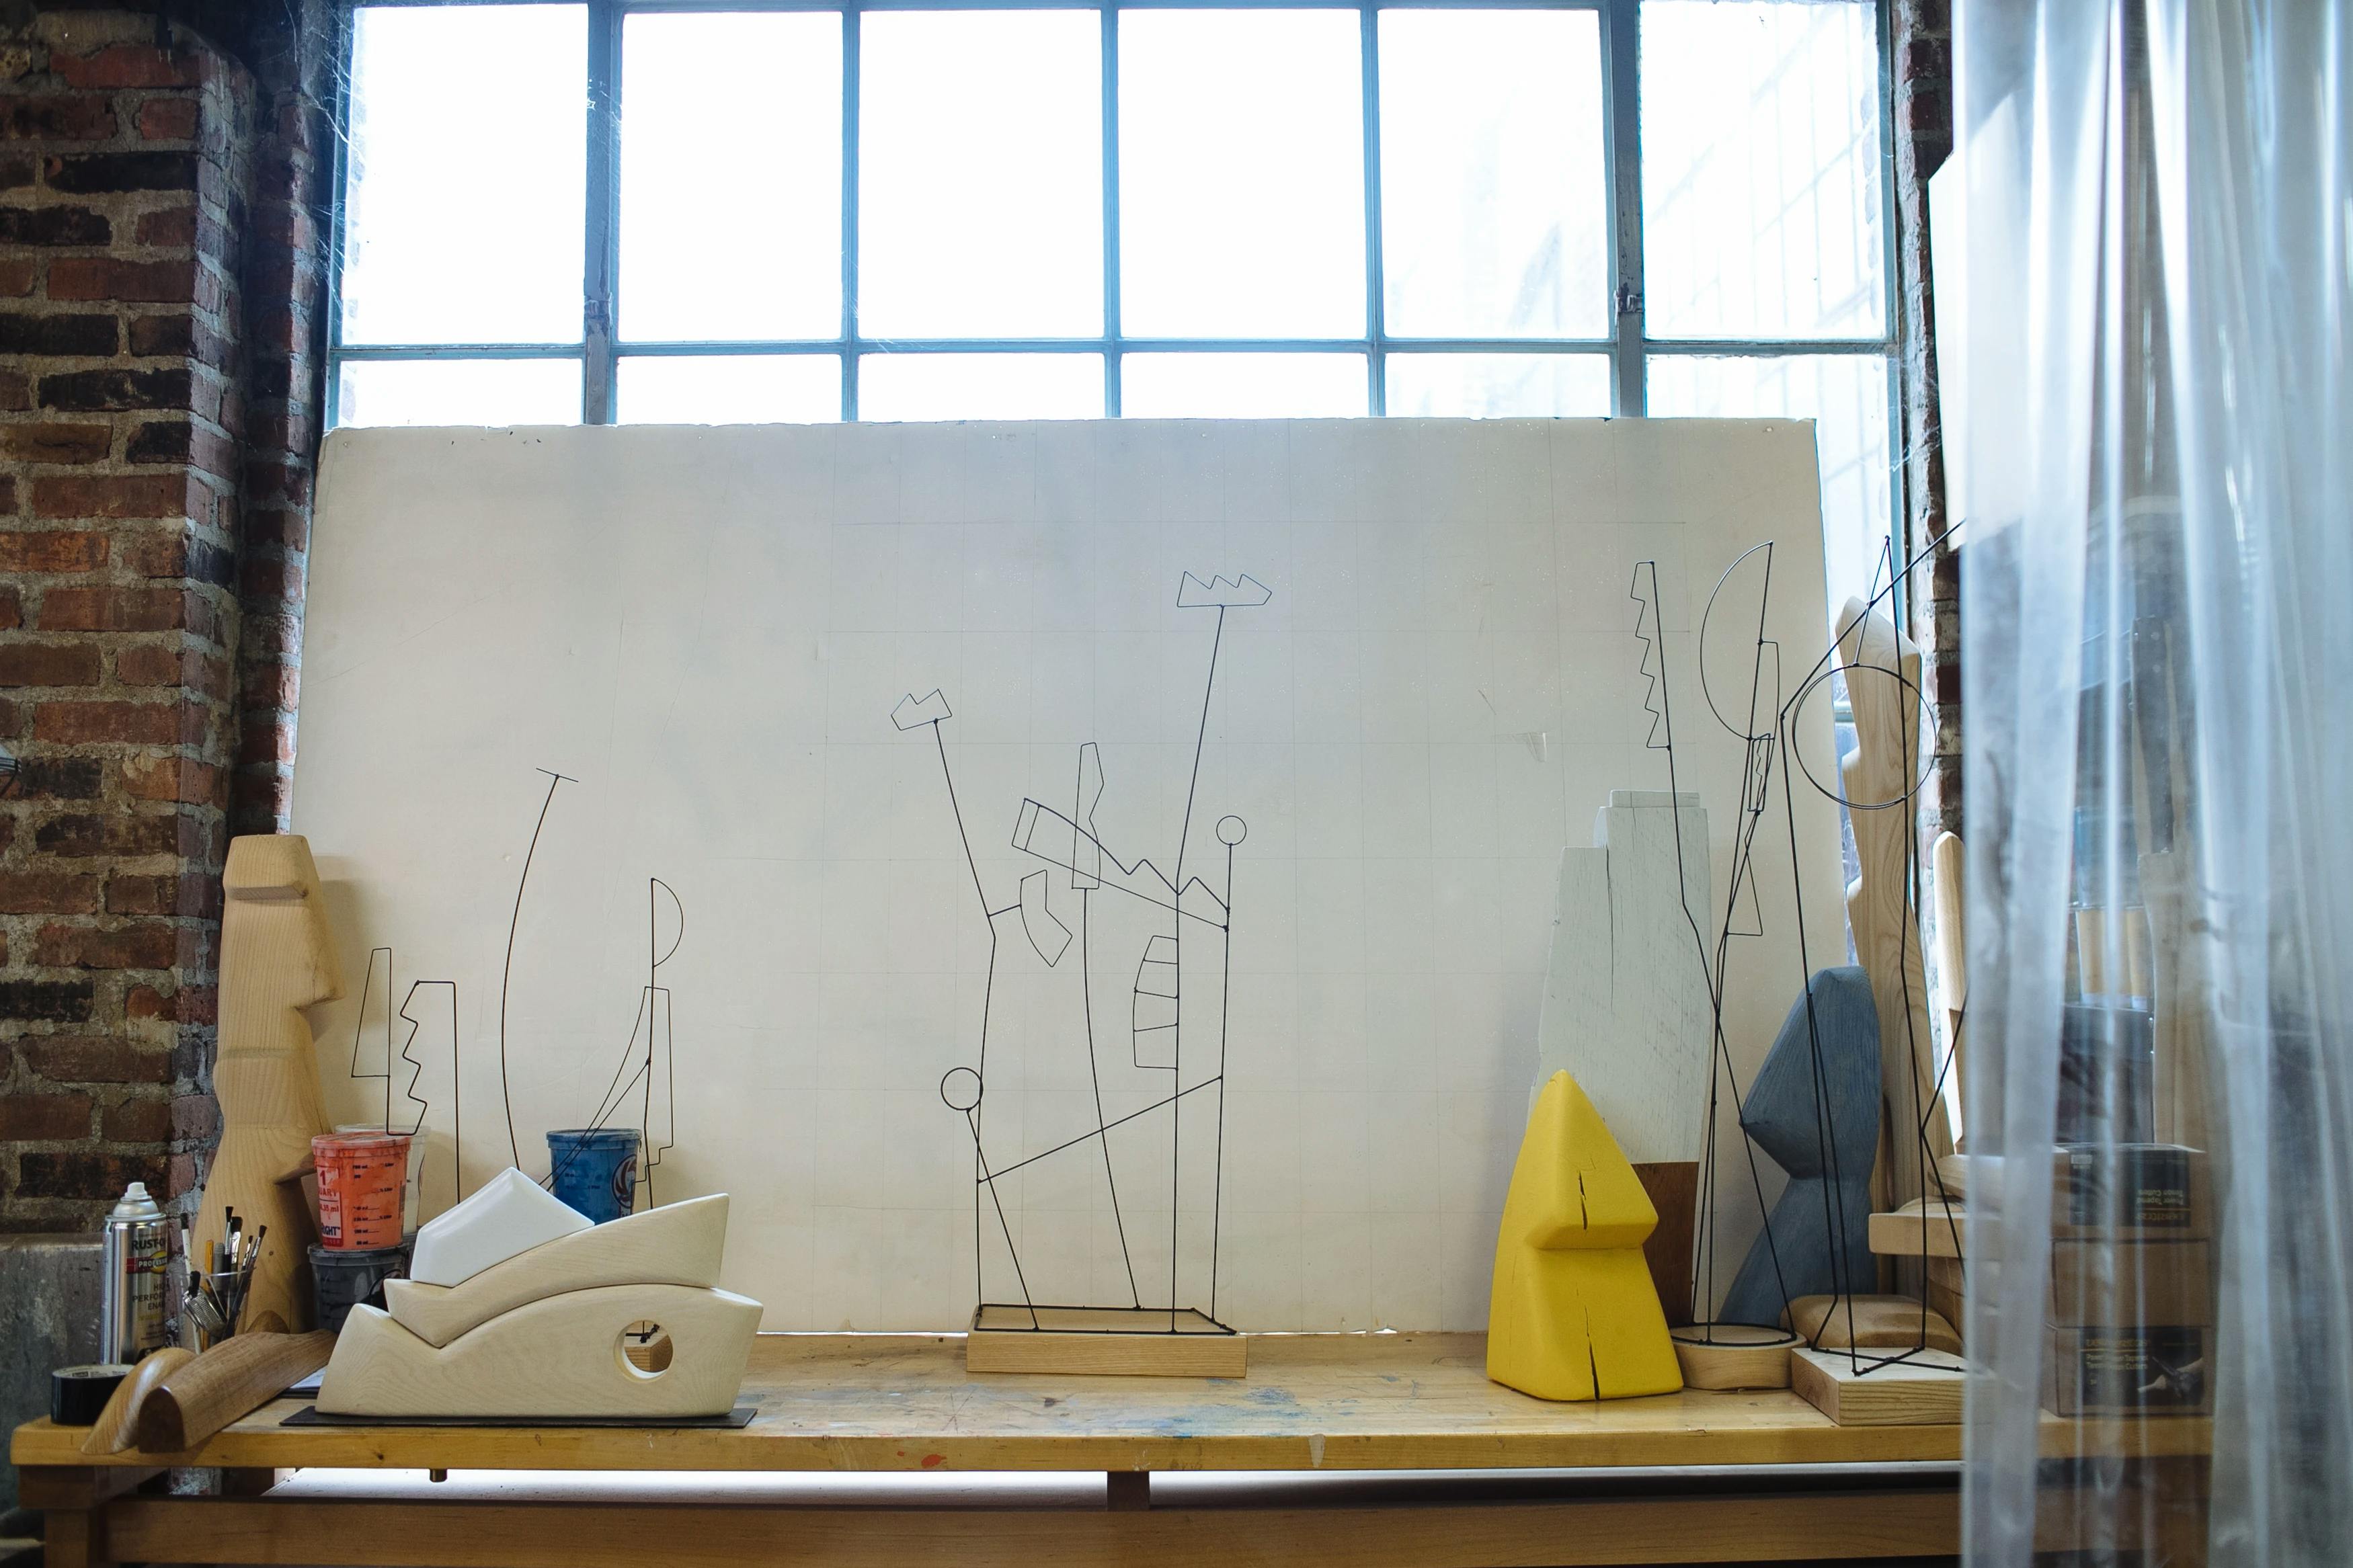 Three abstract wire sculptures on top of a wooden table in artist Fitzhugh Karol's workshop.